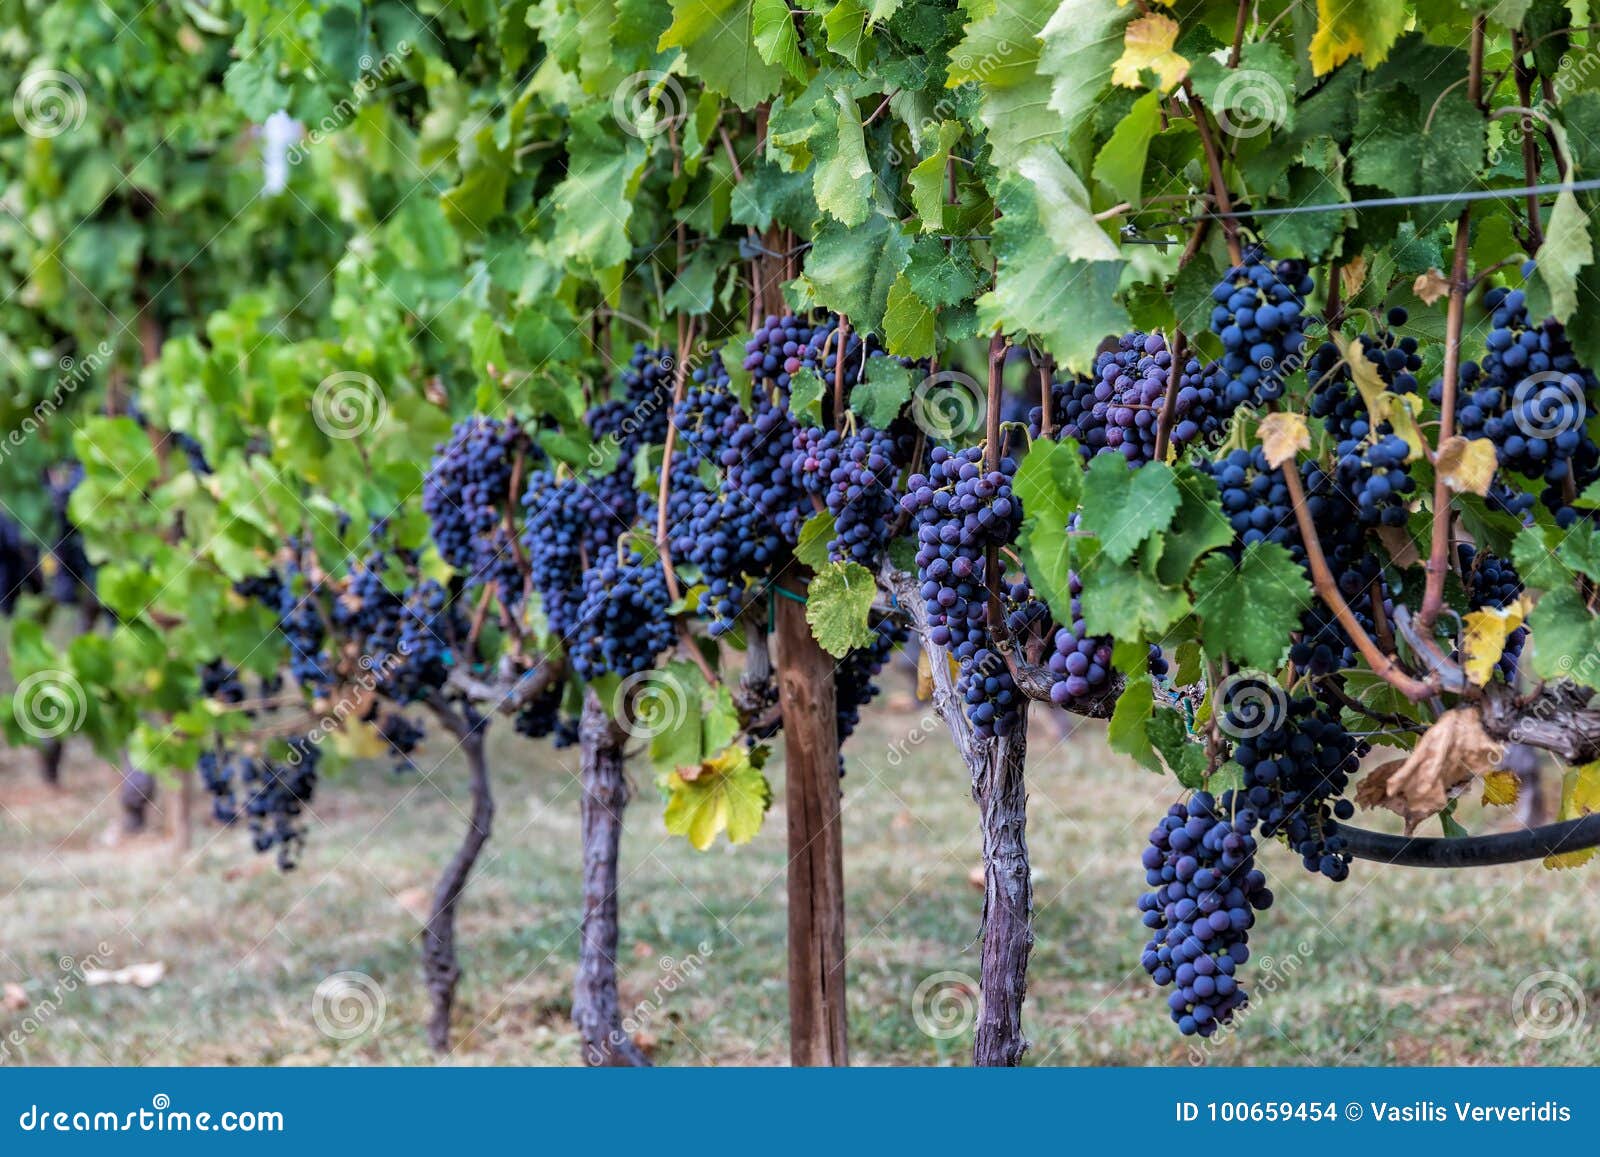 large bunche of red wine grapes hang from a vine.